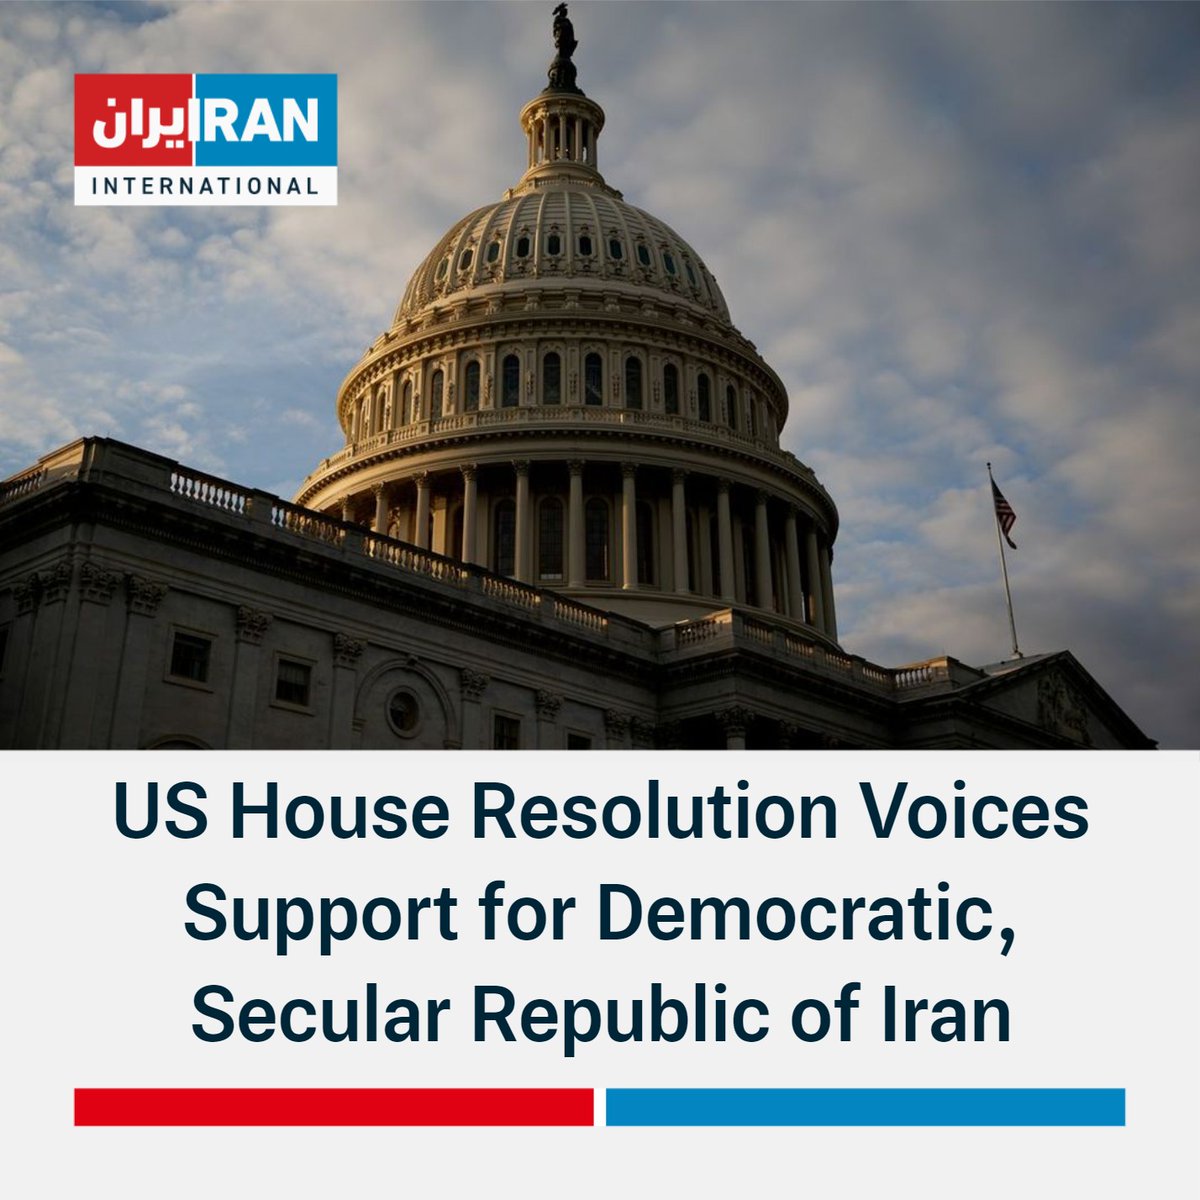 A US House resolution cosponsored by 165 representatives “expresses support for the Iranian people’s desire for a democratic, secular, and nonnuclear Republic of Iran, and condemns violations of human rights and state-sponsored terrorism by the Iranian Government.”